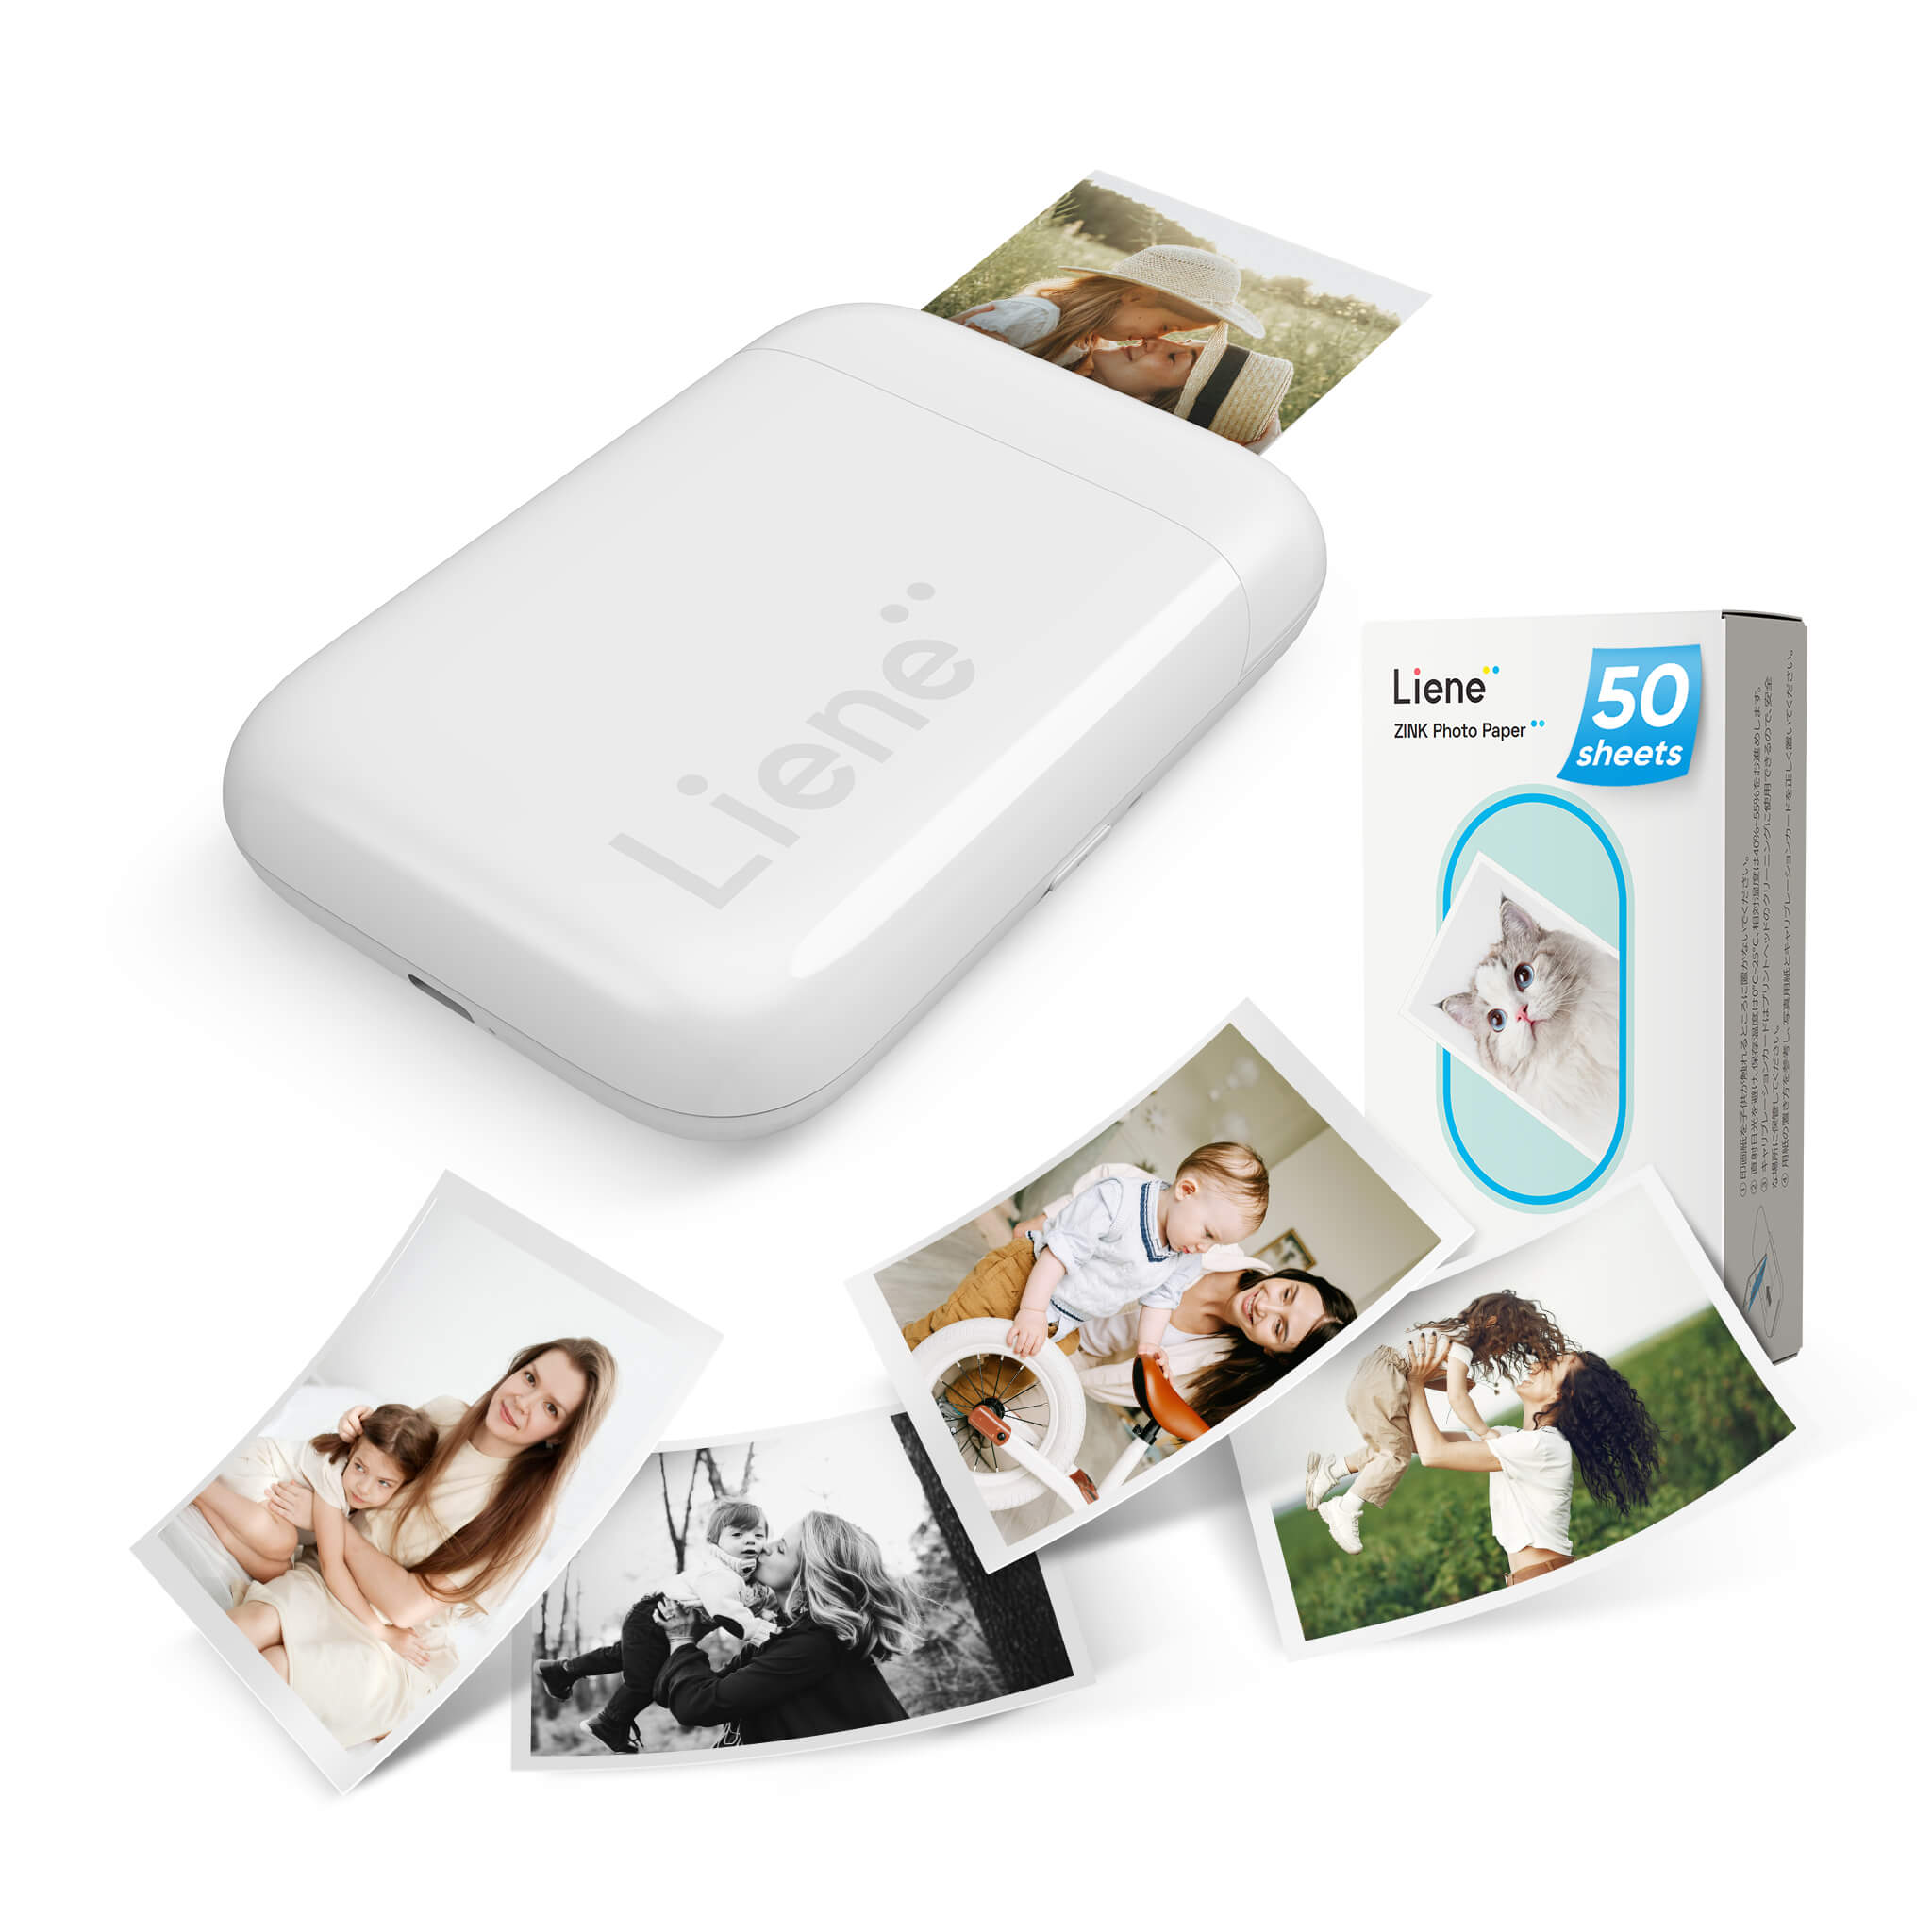 Liene Pearl K100 2x3" Portable Photo Printer - White (50 Zink Photo Papers)